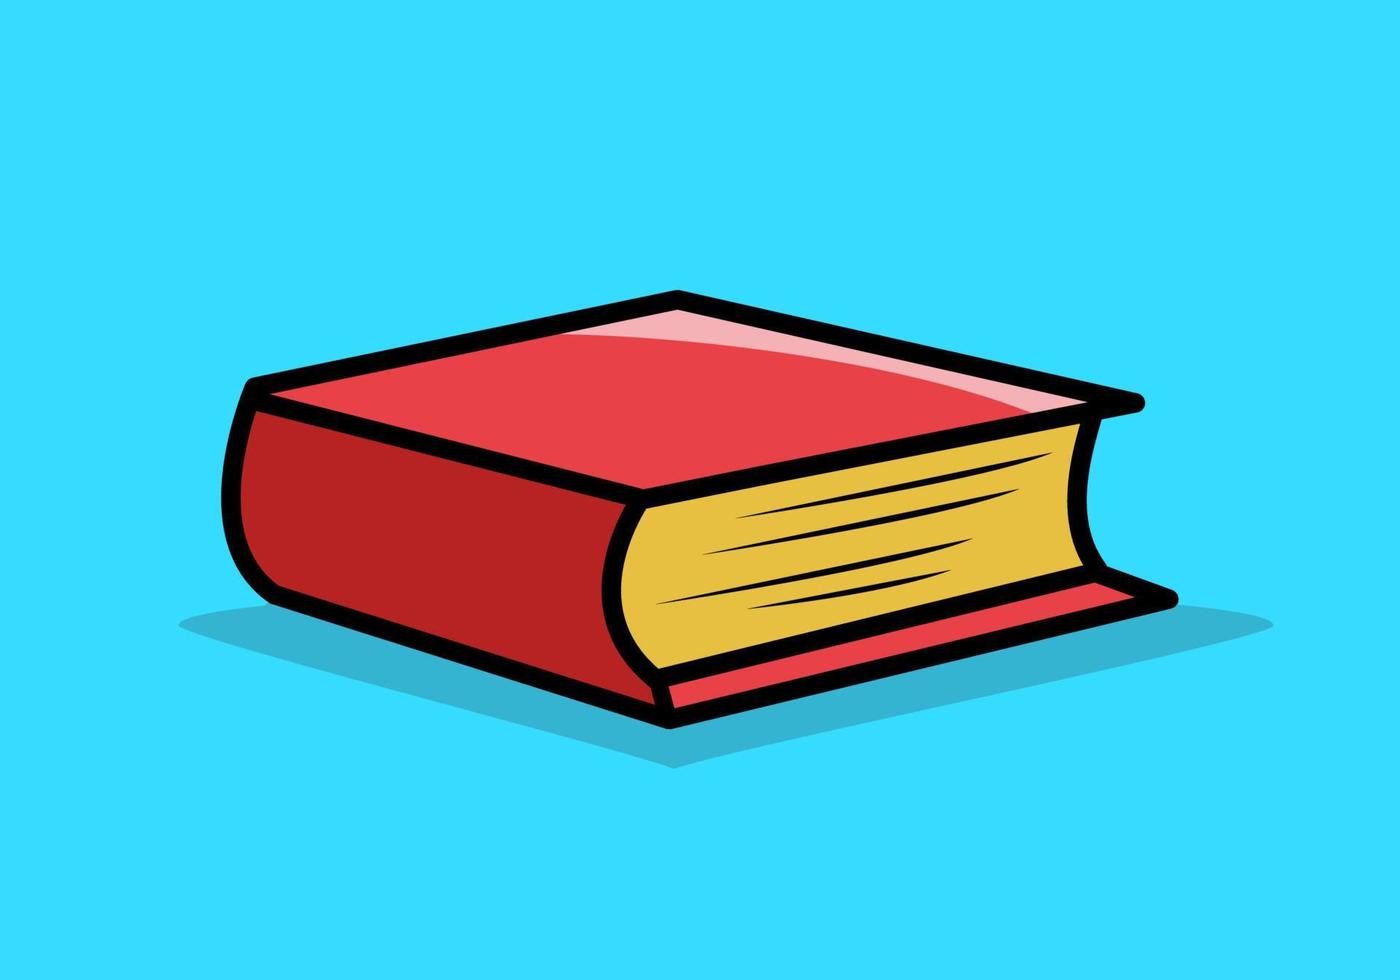 Red book flat illustration in blue background vector